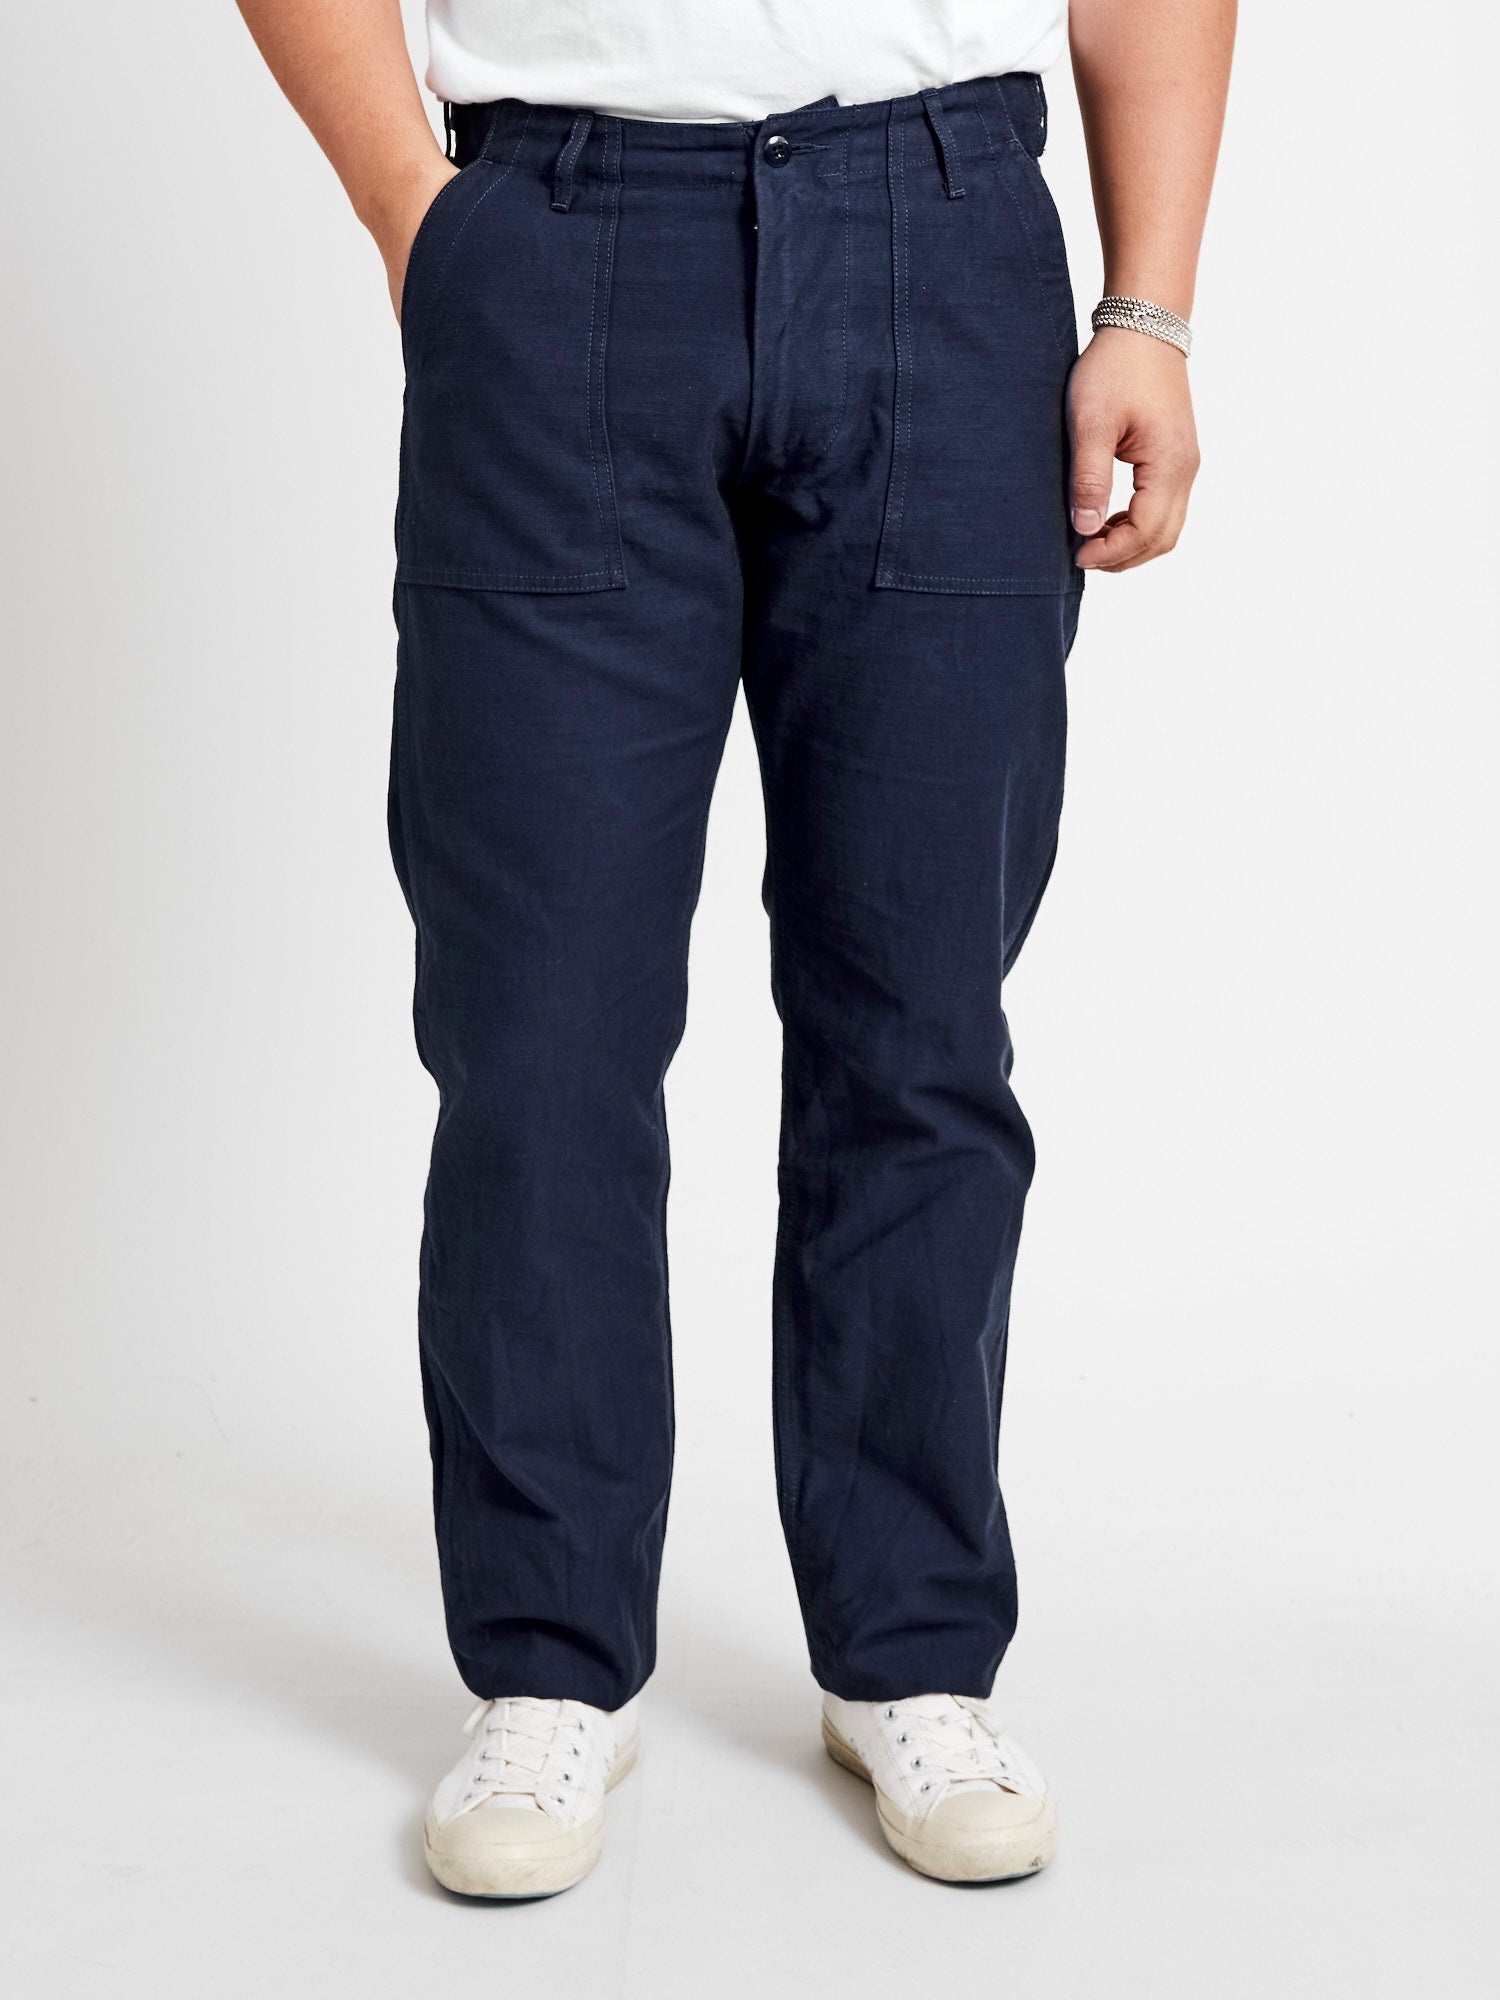 1811-IND Military Baker Pants in Indigo - 2